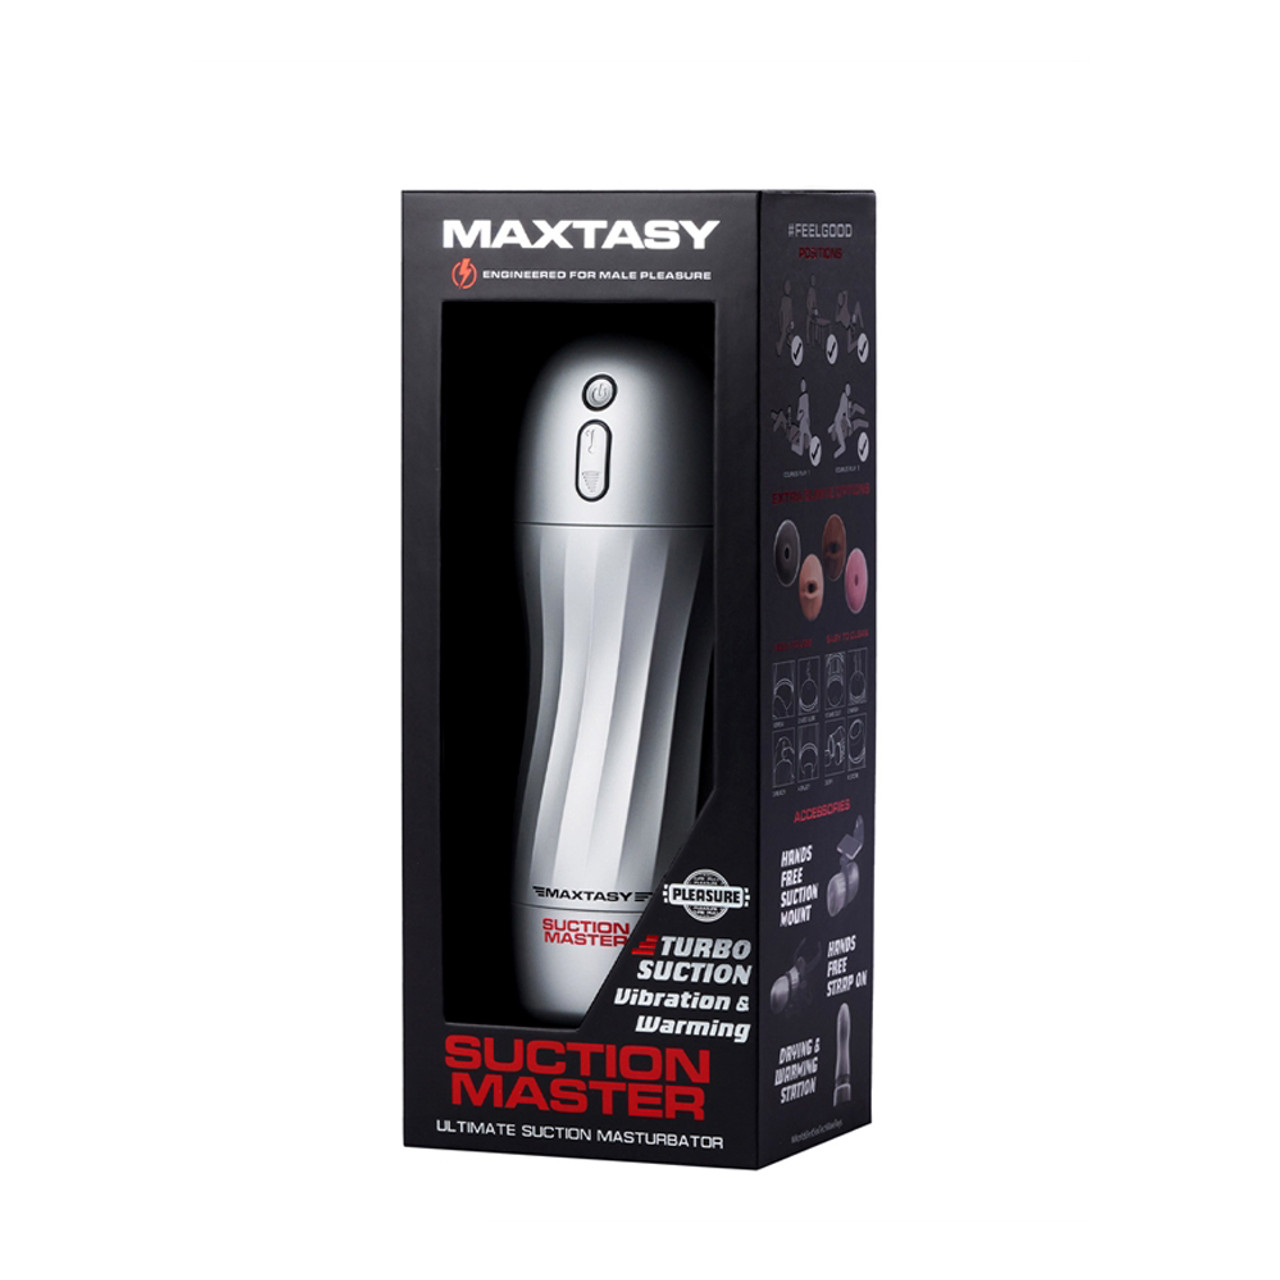 Buy The Suction Master 20 Function Rechargeable Realistic Mouth Sucking Warming Vibrating Male